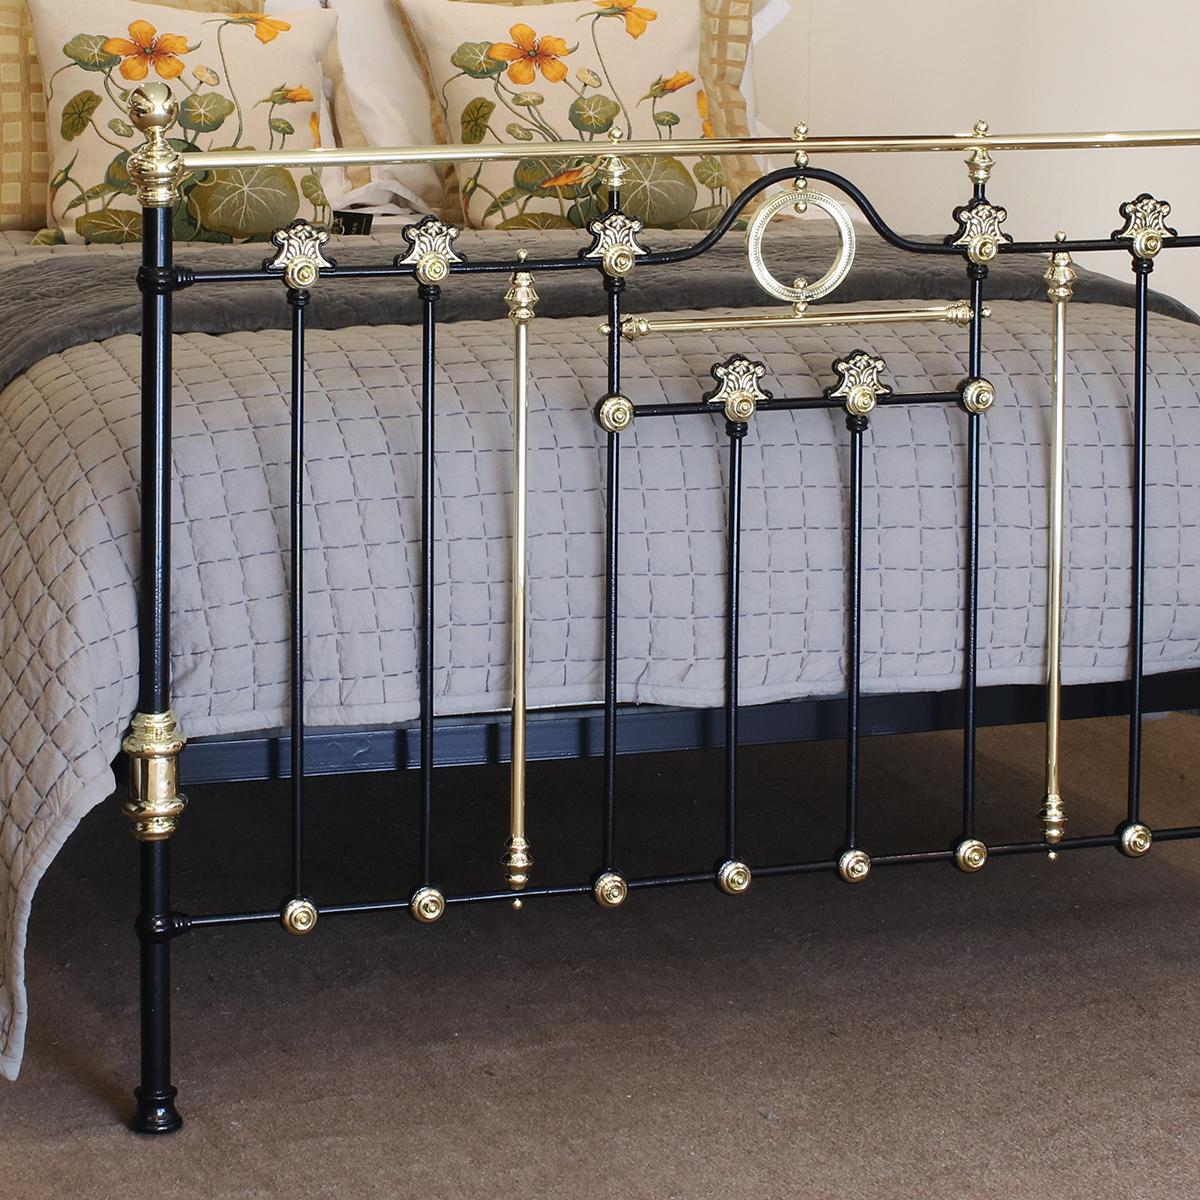 Antique bed in black with brass top rail, decorative castings and brass kneecaps.

This bed accepts a UK King size or US Queen size (5ft, 60in or 150cm wide) base and mattress set.

The price includes a standard firm bed base to support the